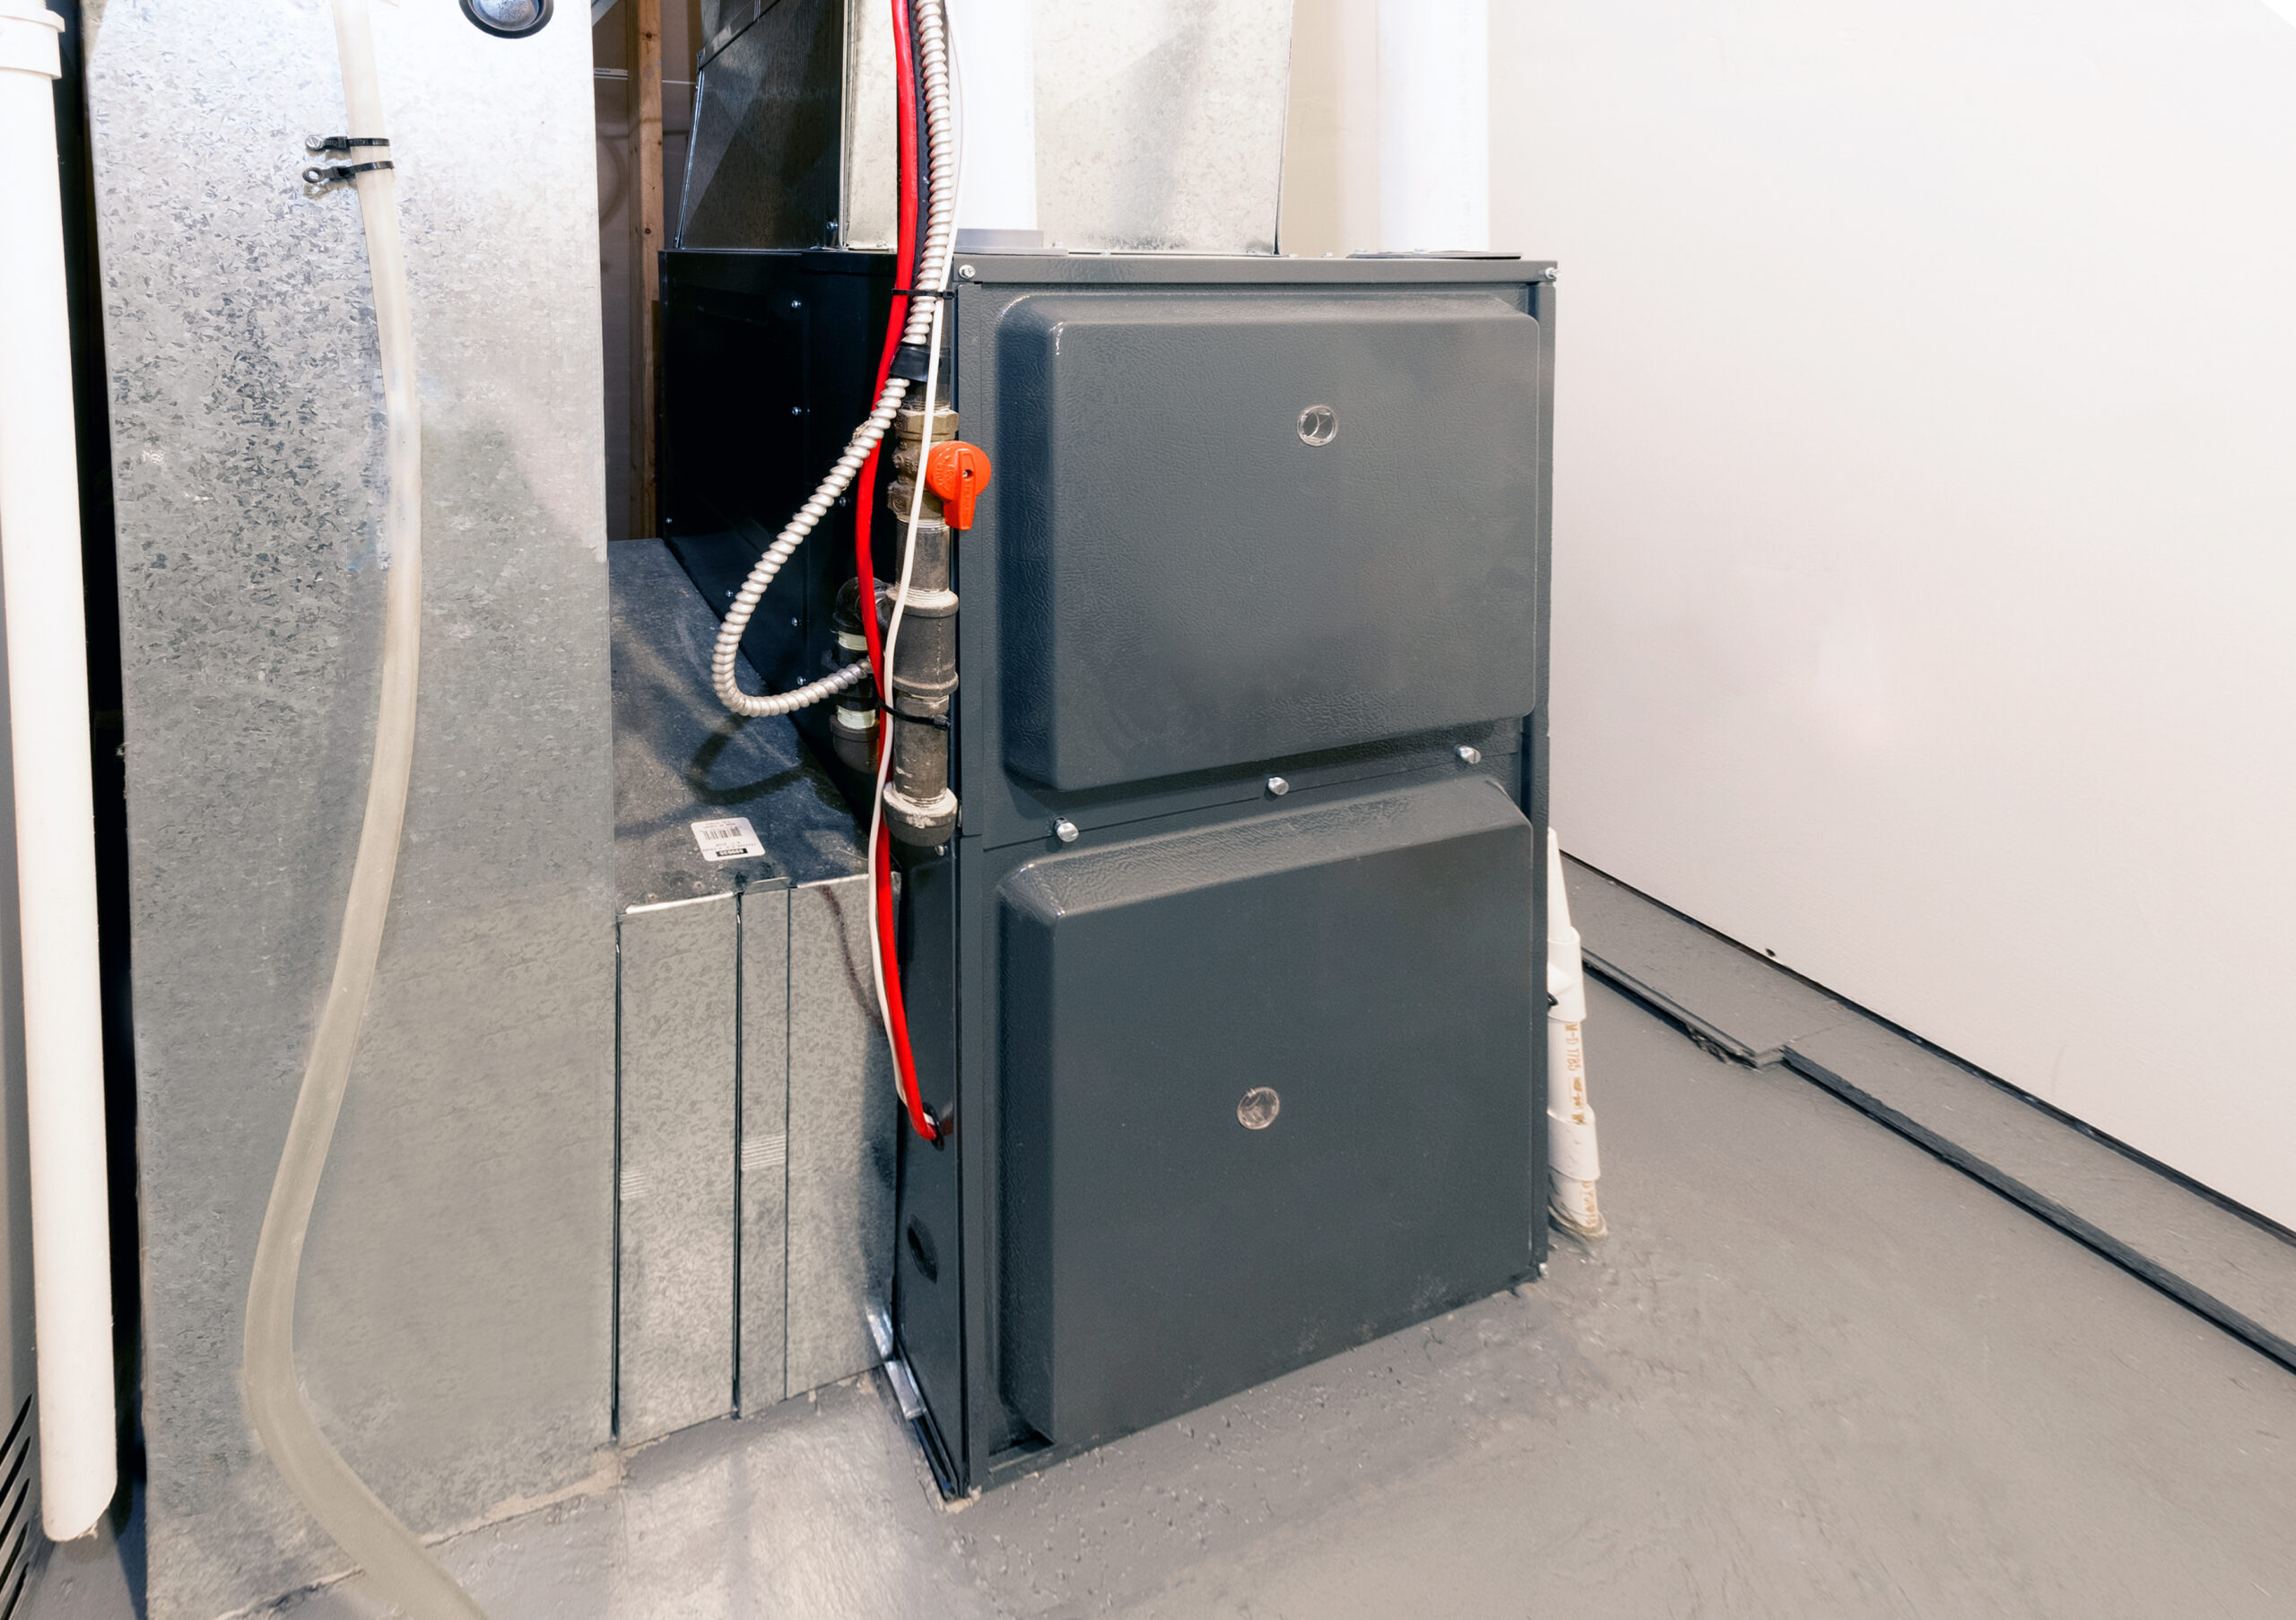 Electric furnace installed in the basement of an Ohio home